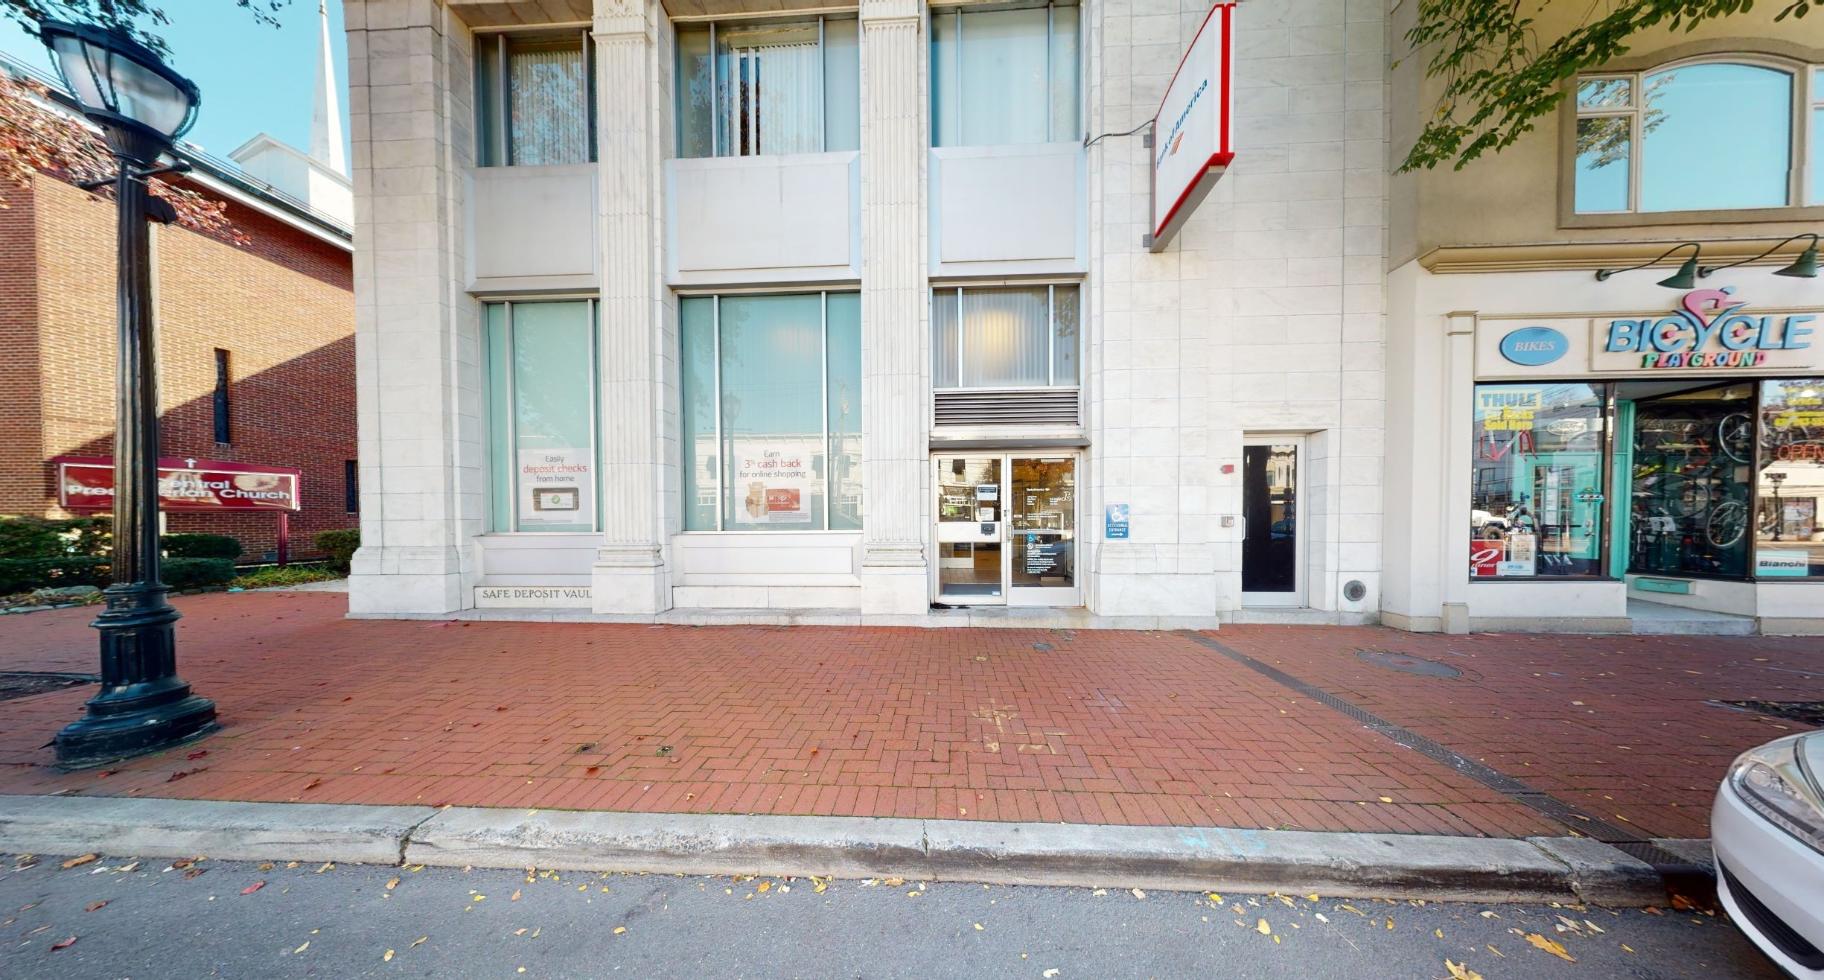 Bank of America financial center with drive-thru ATM | 250 Main St, Huntington, NY 11743